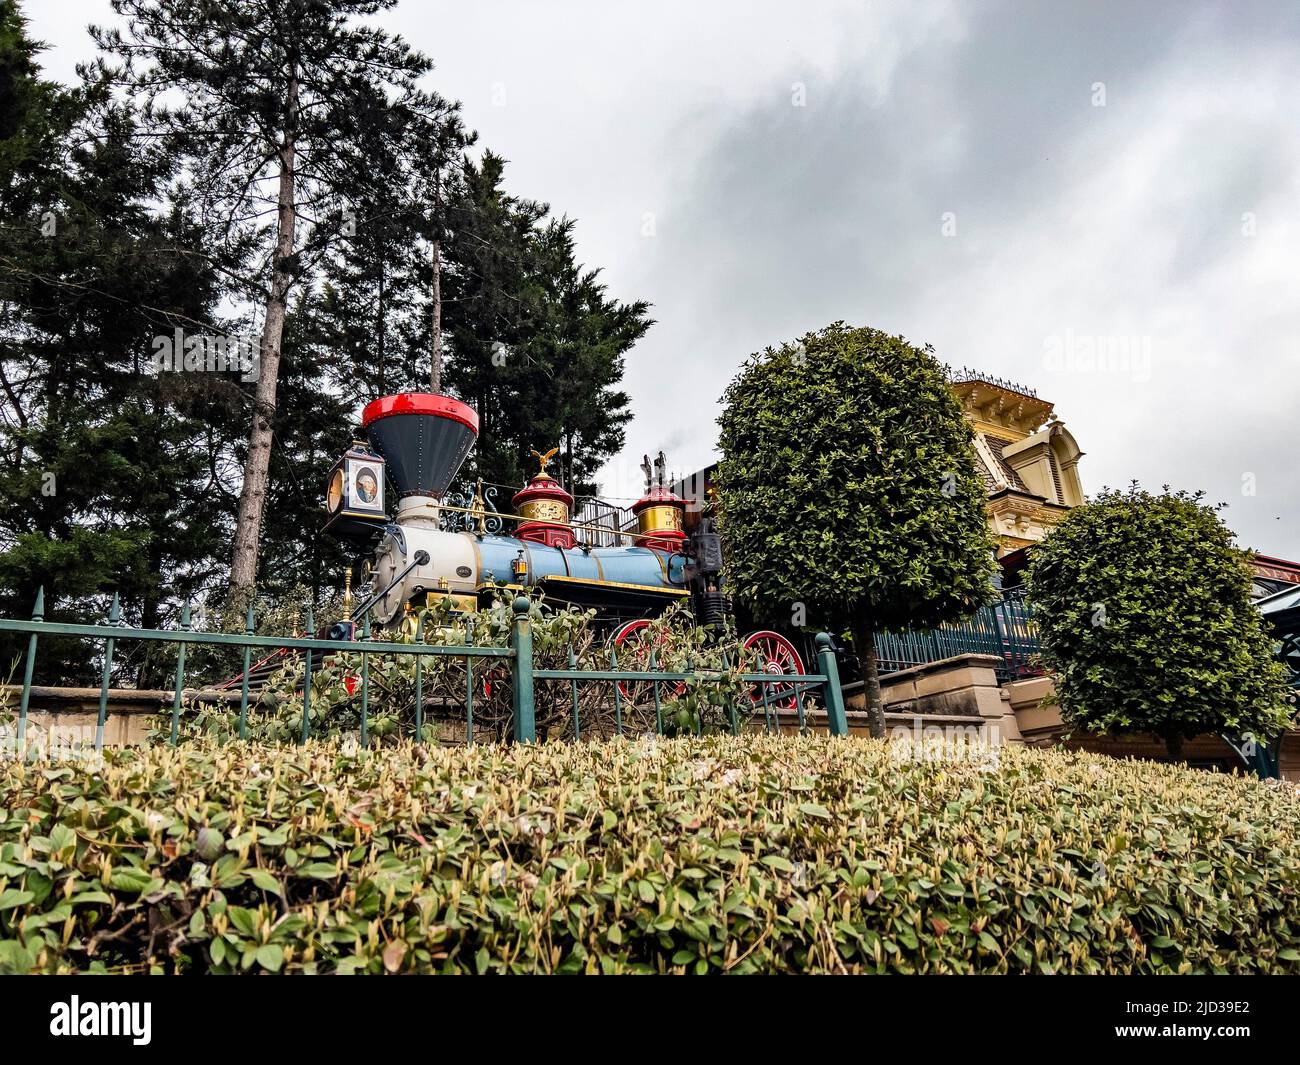 Paris, France - 04/05/2022: Iconic train of Disneyland waiting in station. Train of Disneyland at winter time. Stock Photo